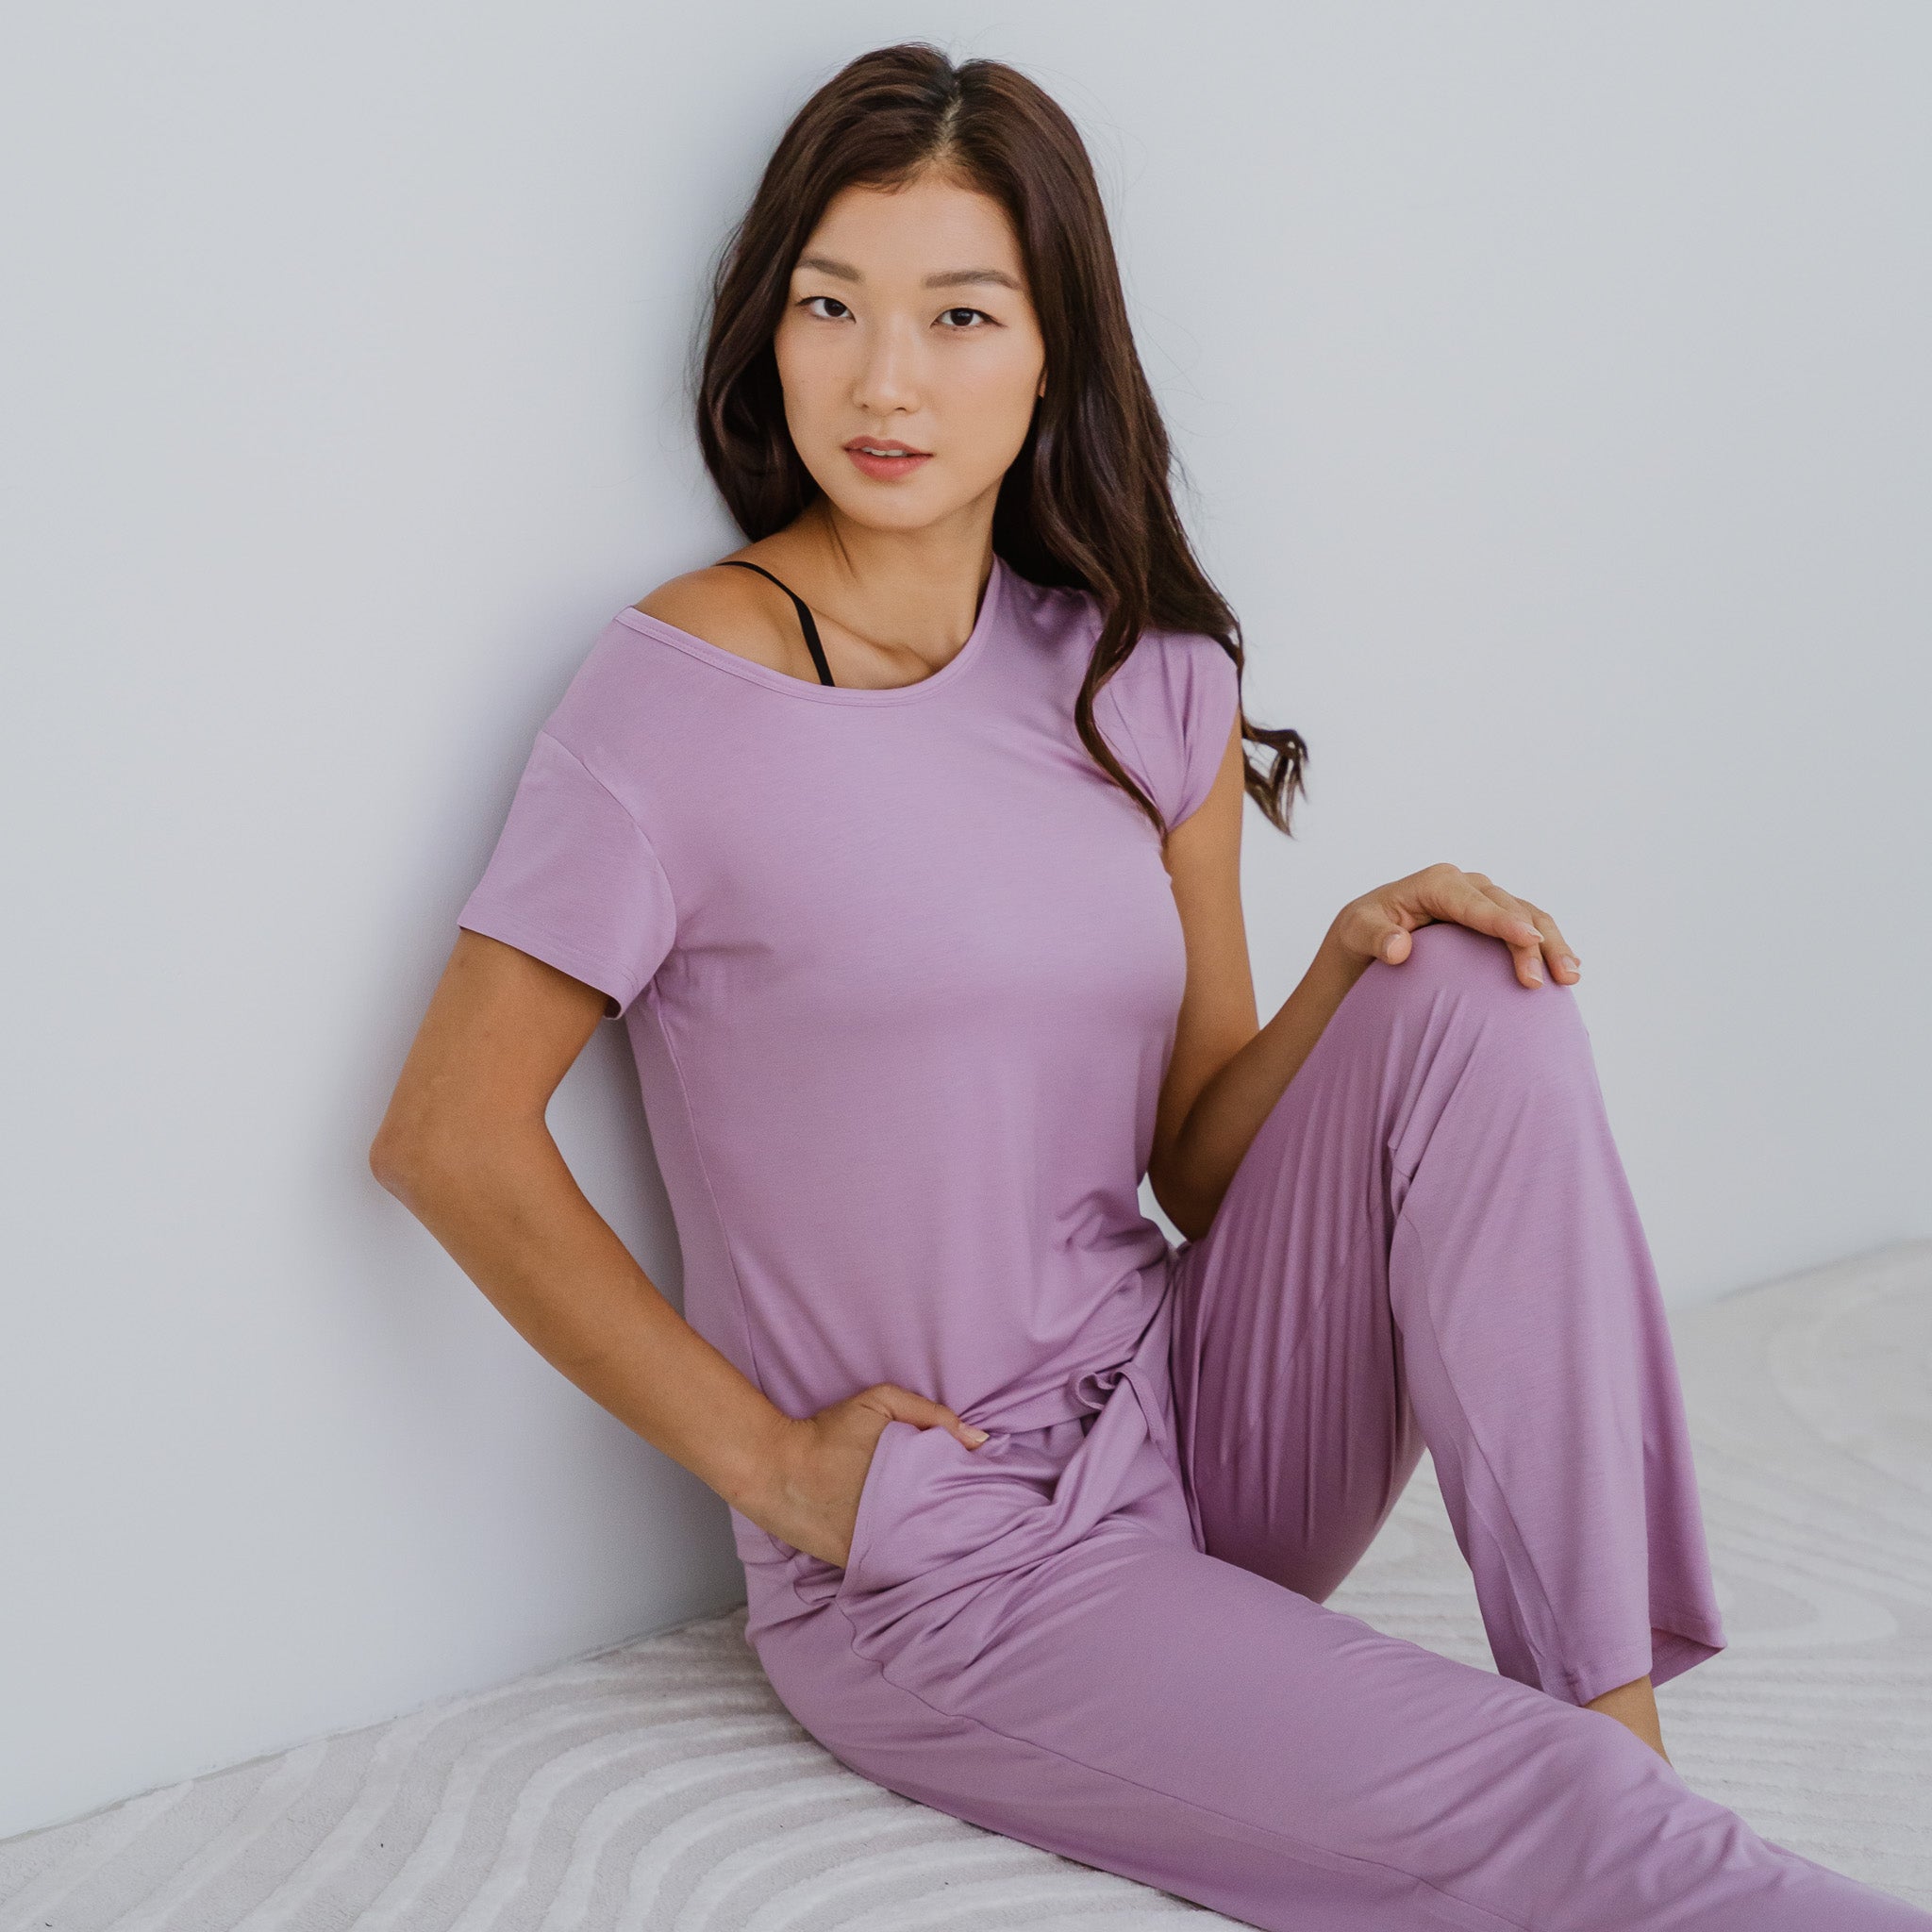 Everyday Bra-less Modal® Fabric Loungewear set in Lilac (With in-built